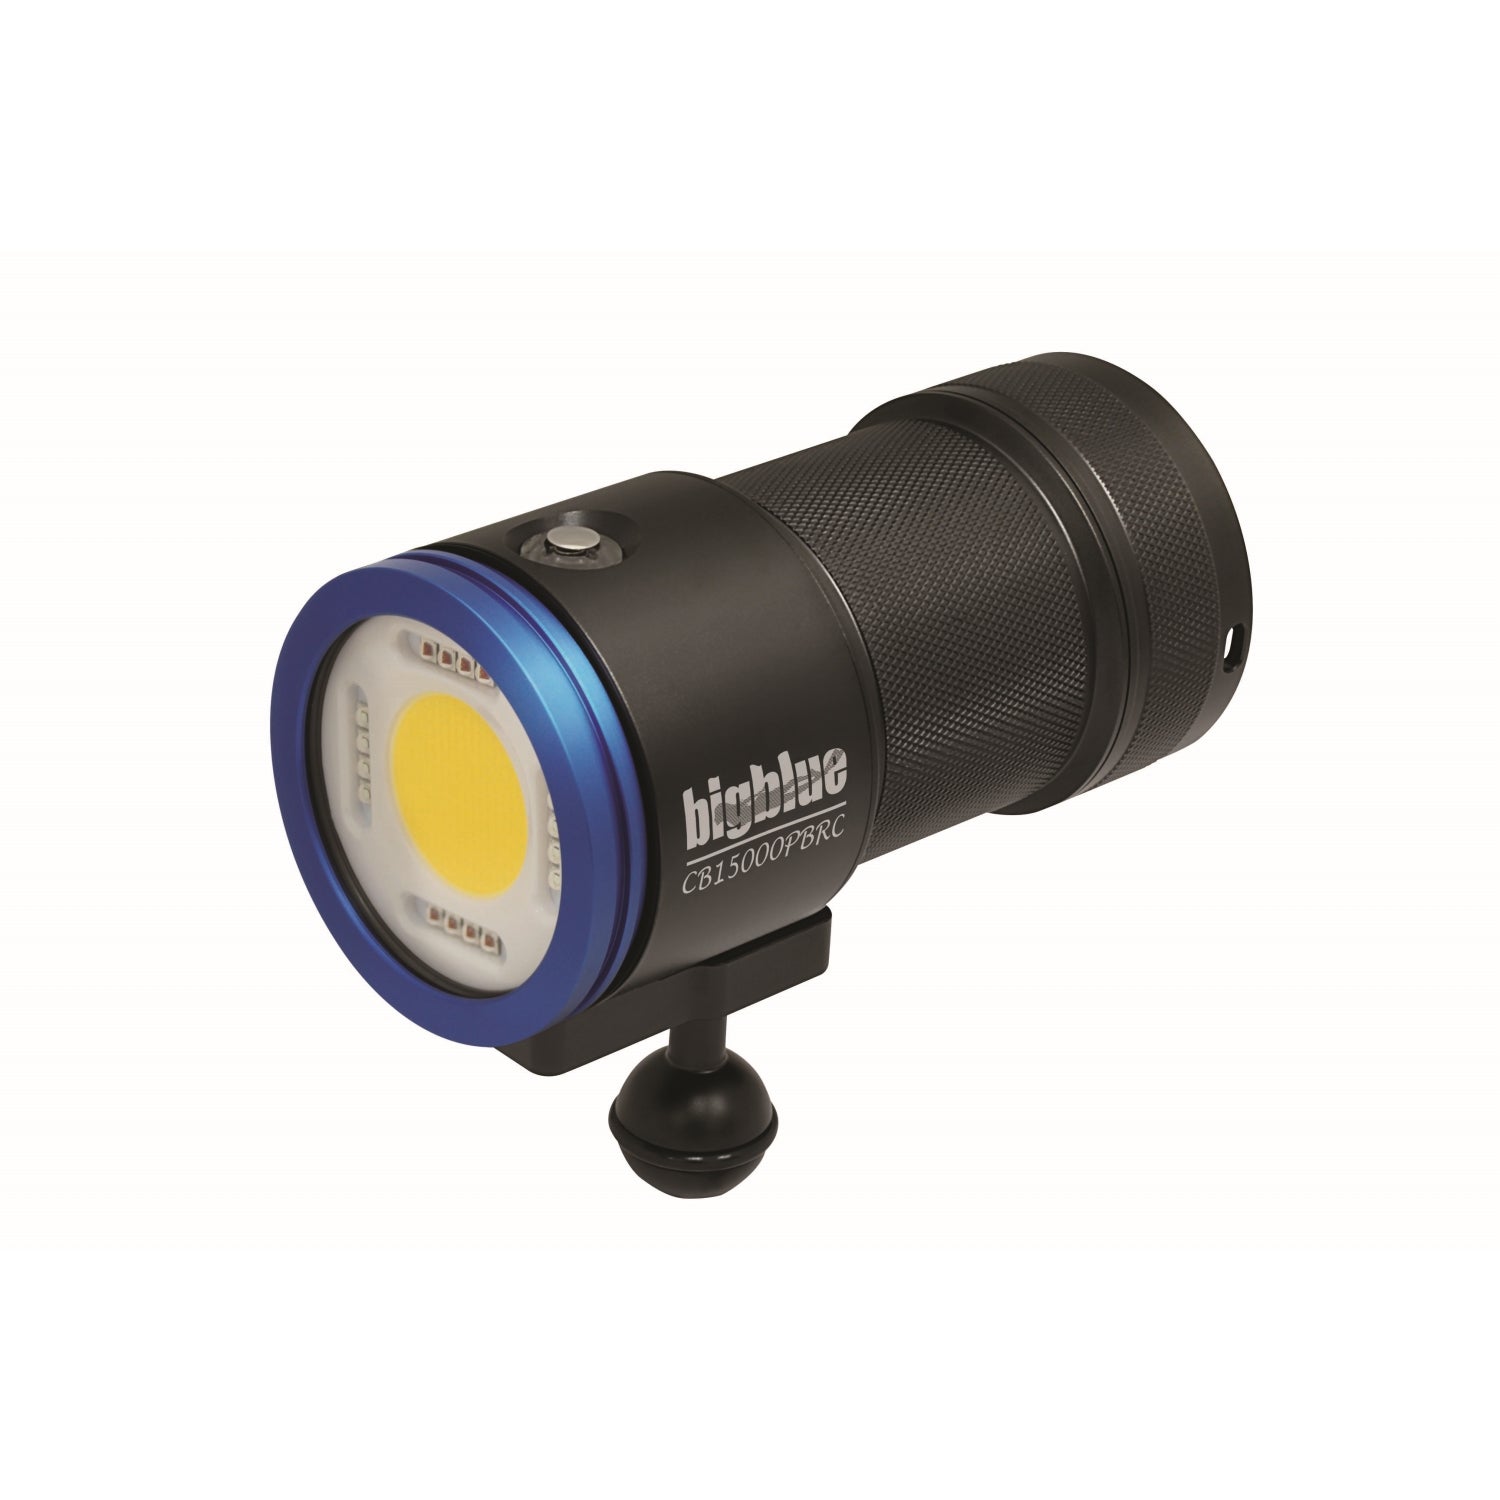 BigBlue 15,000 Lumen Video Light RC-Ready, Warm White w/ Red and Blue Modes-